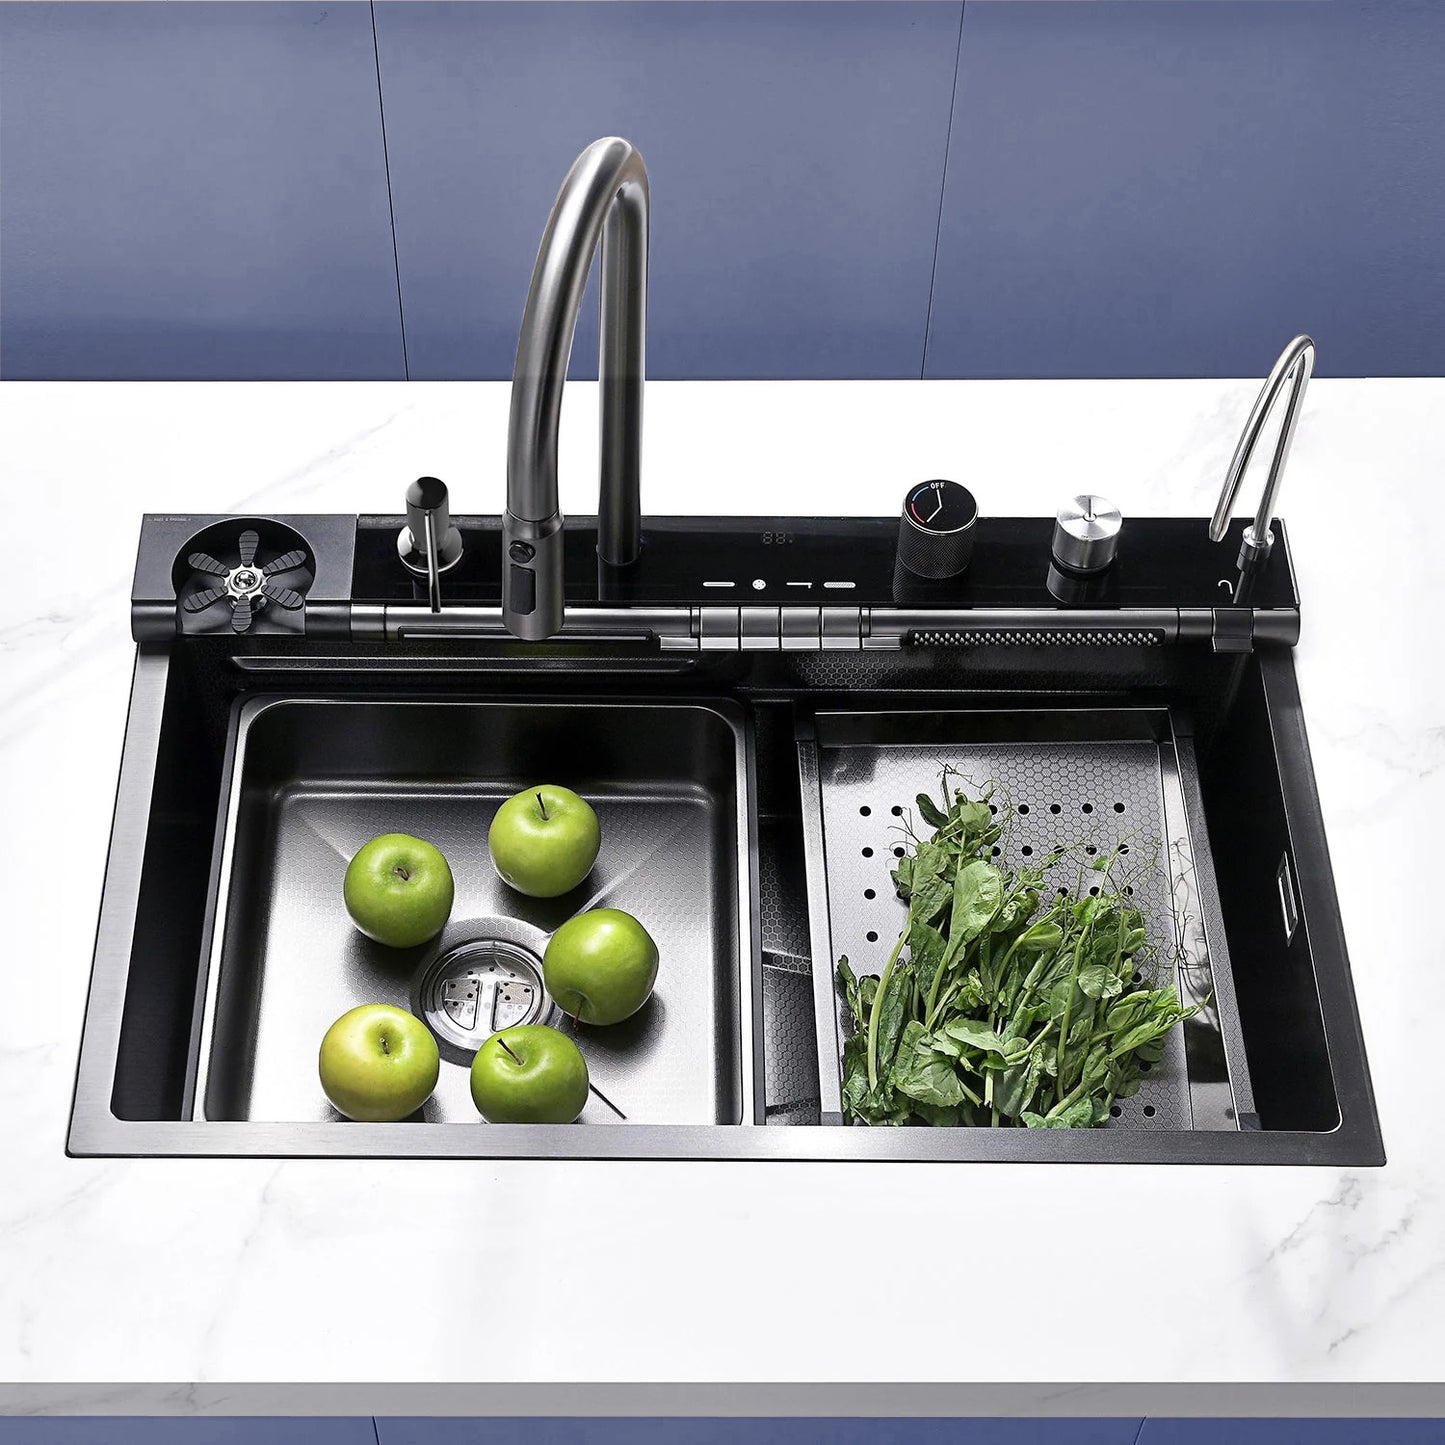  Analyzing image     Multifunctional-deep-kitchen-sink-with-Multifunctional-mixing-system-TETRA-SINK-24BS304R75-3